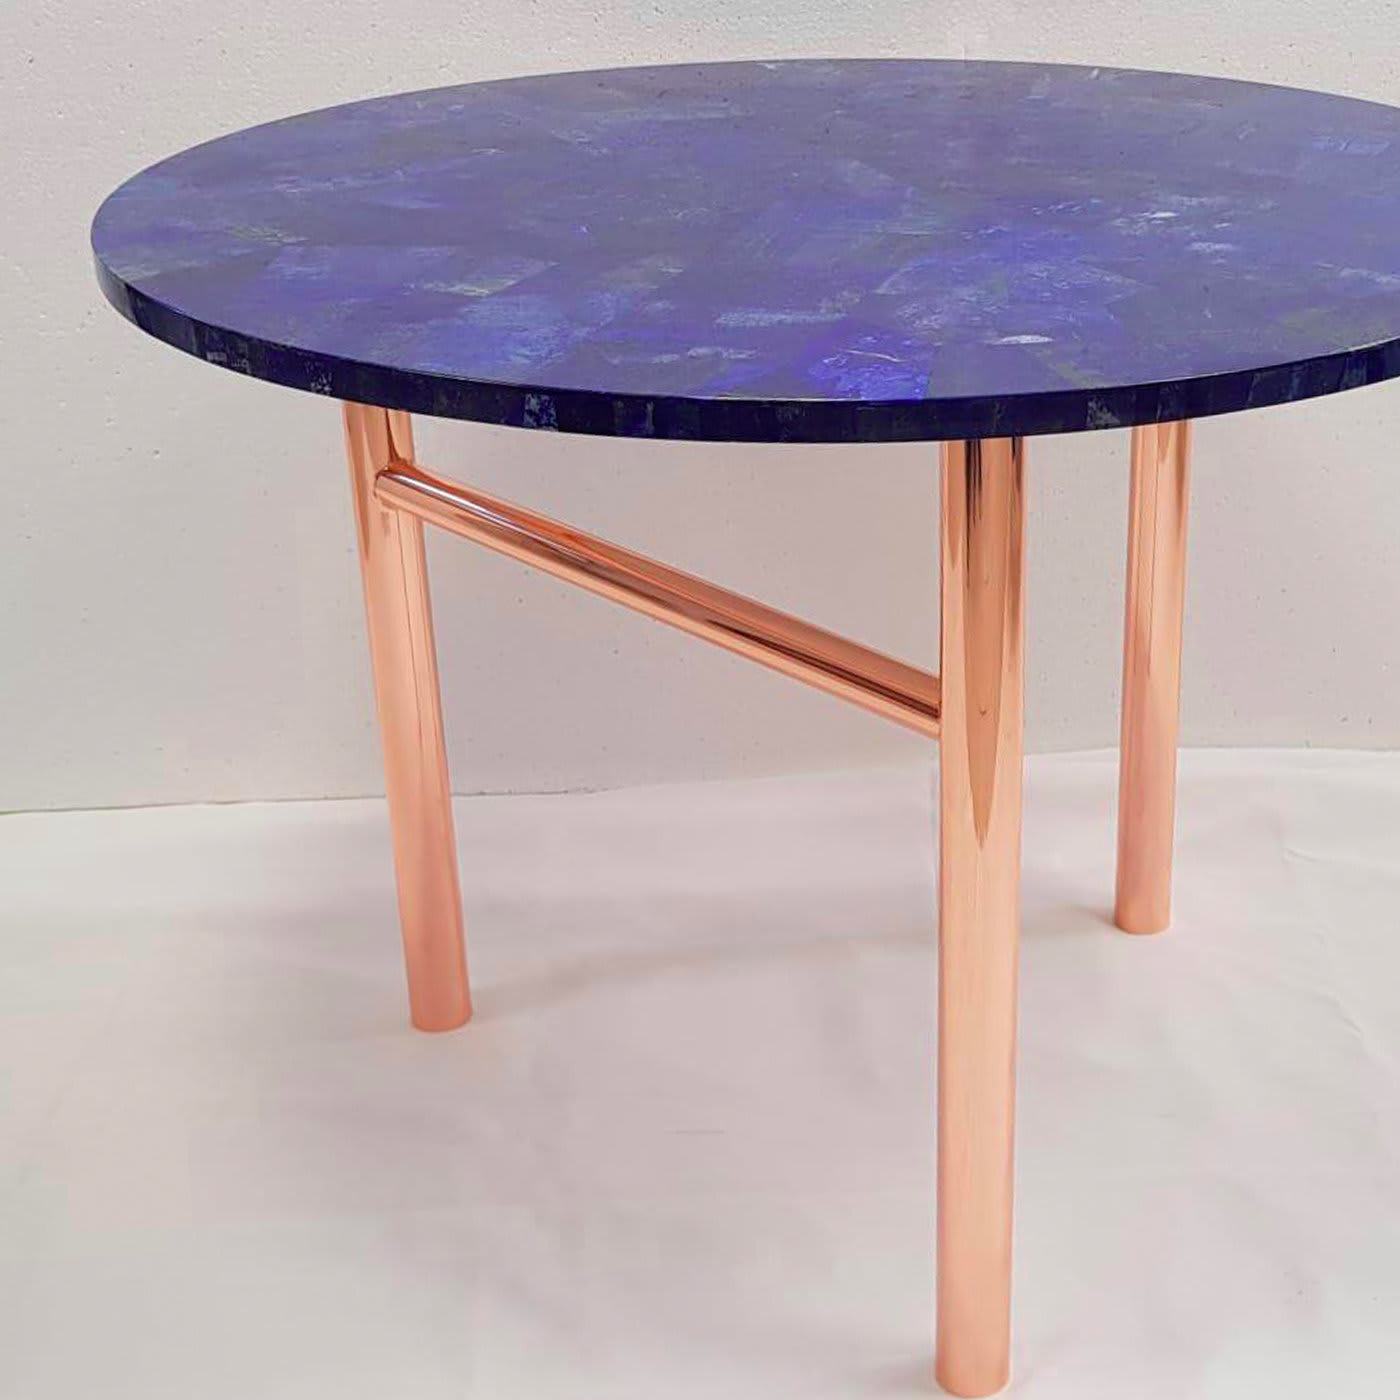 Details about   Sofa Side Table Top Lapis Lazuli Stone Inlaid Marble Coffee Table Heritage Art